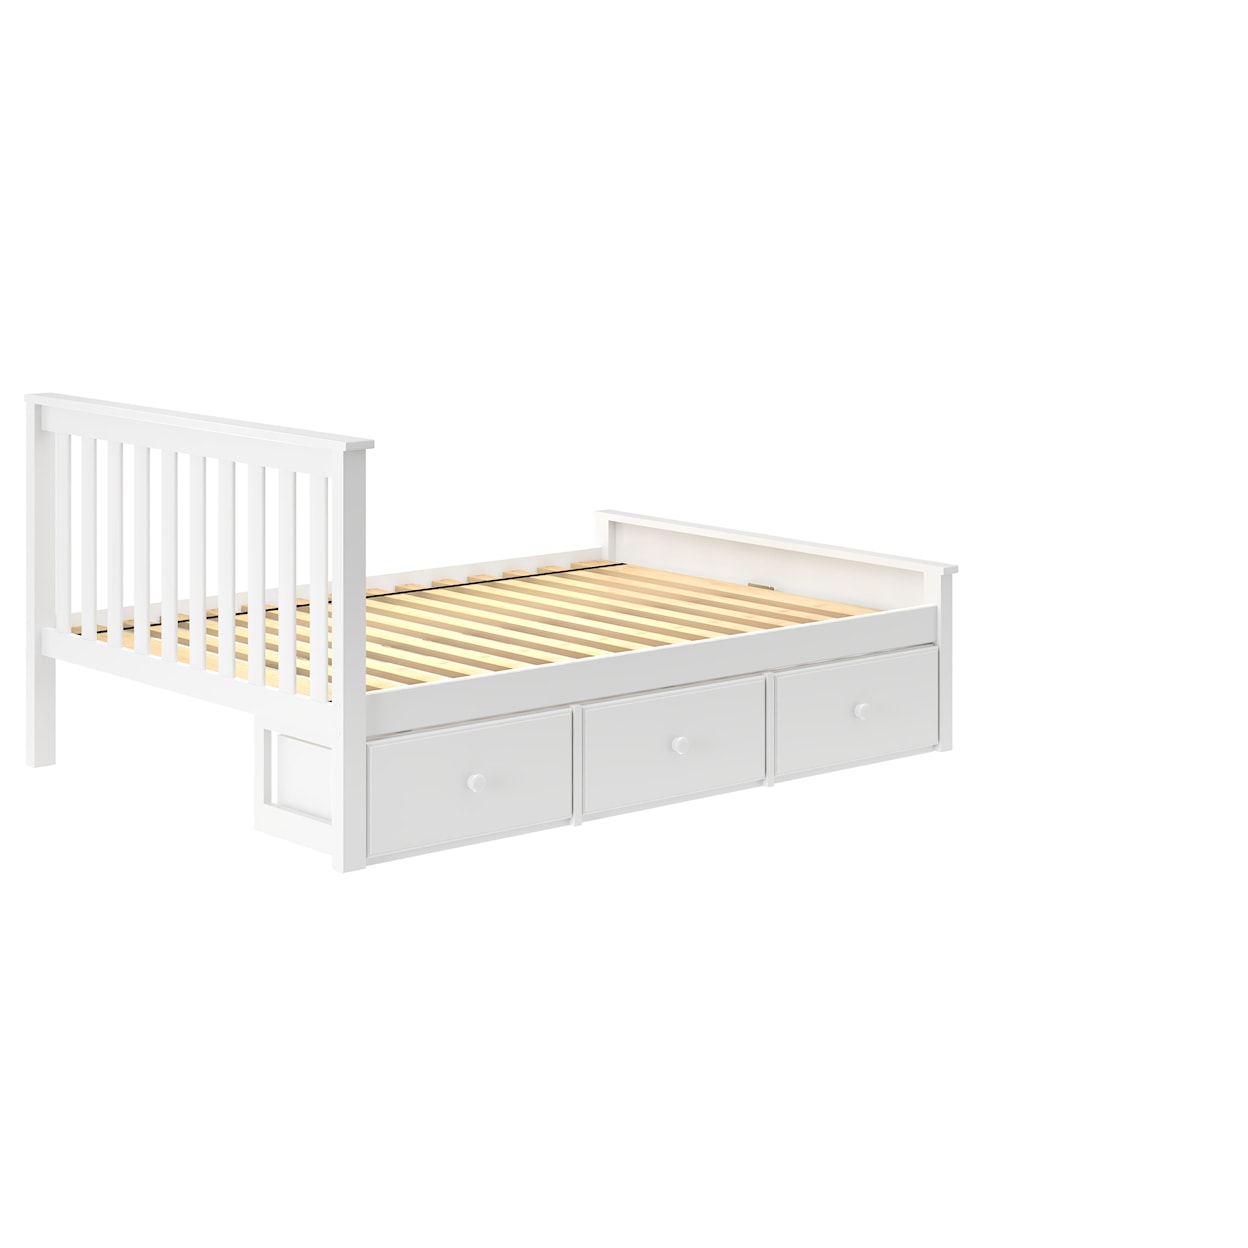 Jackpot Kids Single Beds Dover Youth Full Bed in White